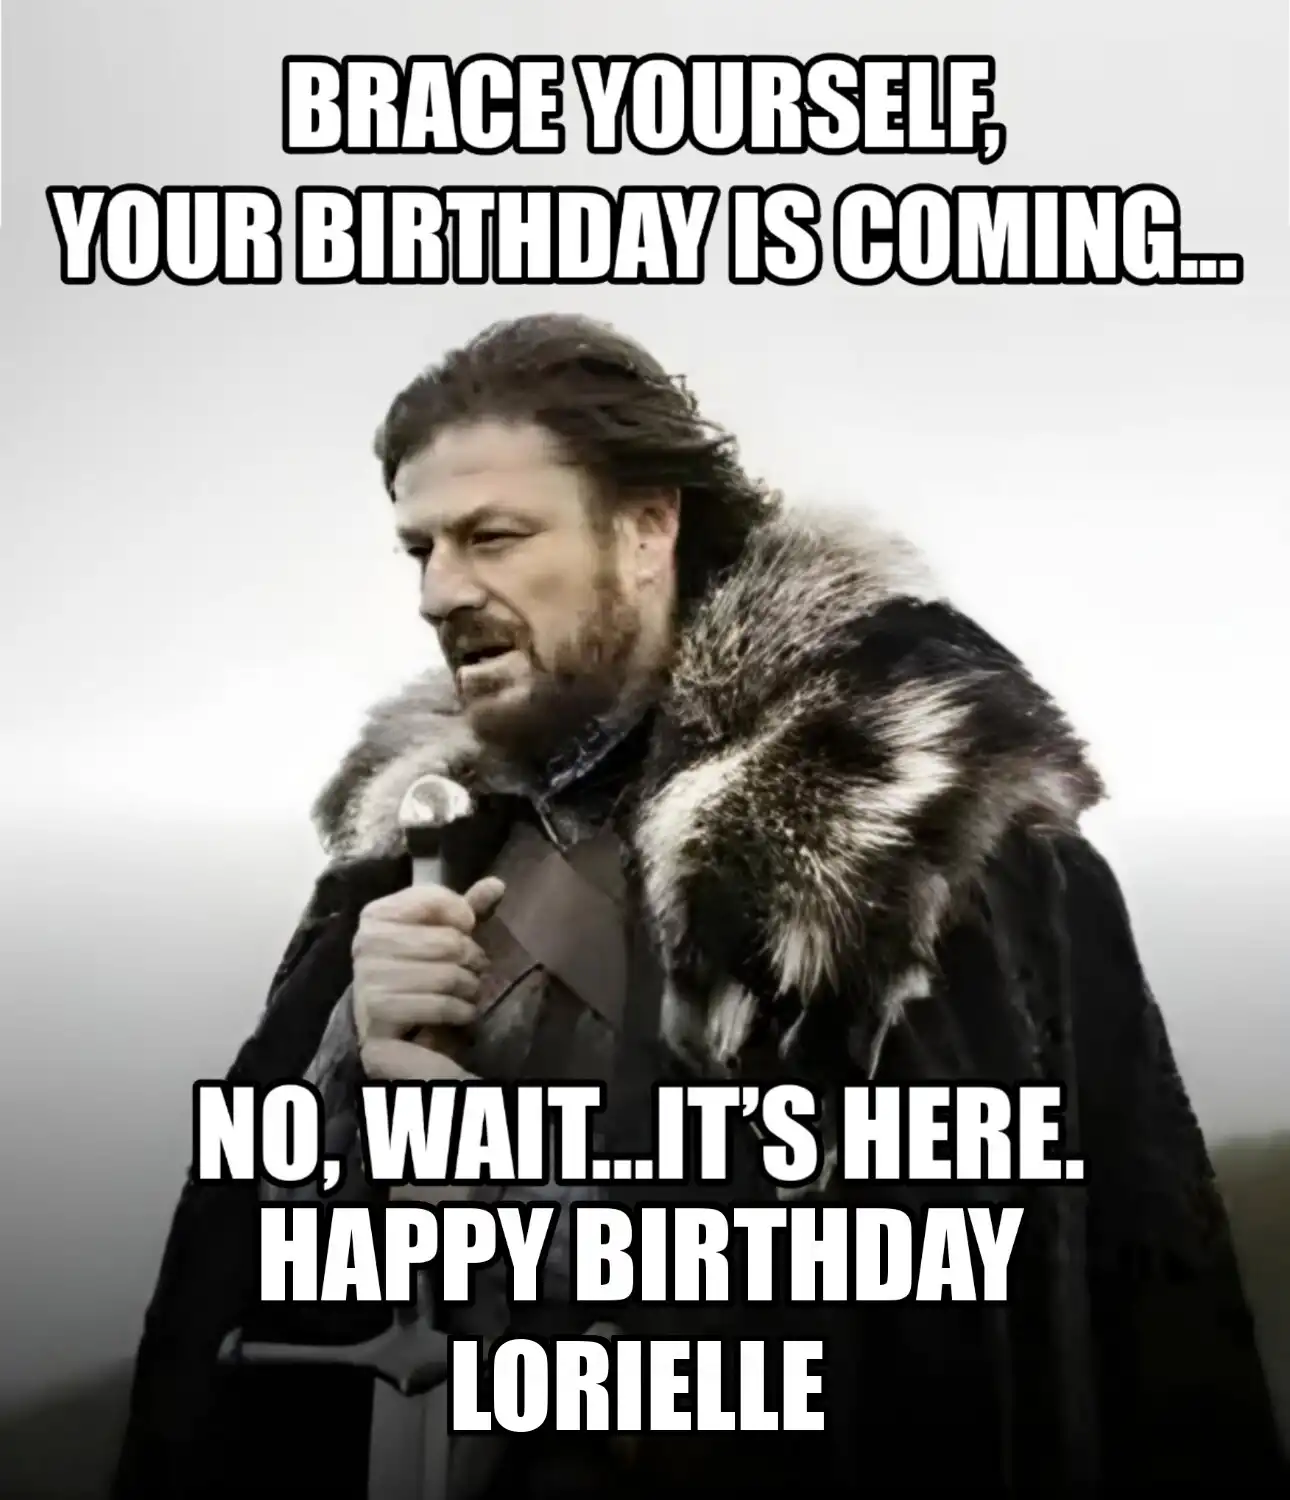 Happy Birthday Lorielle Brace Yourself Your Birthday Is Coming Meme